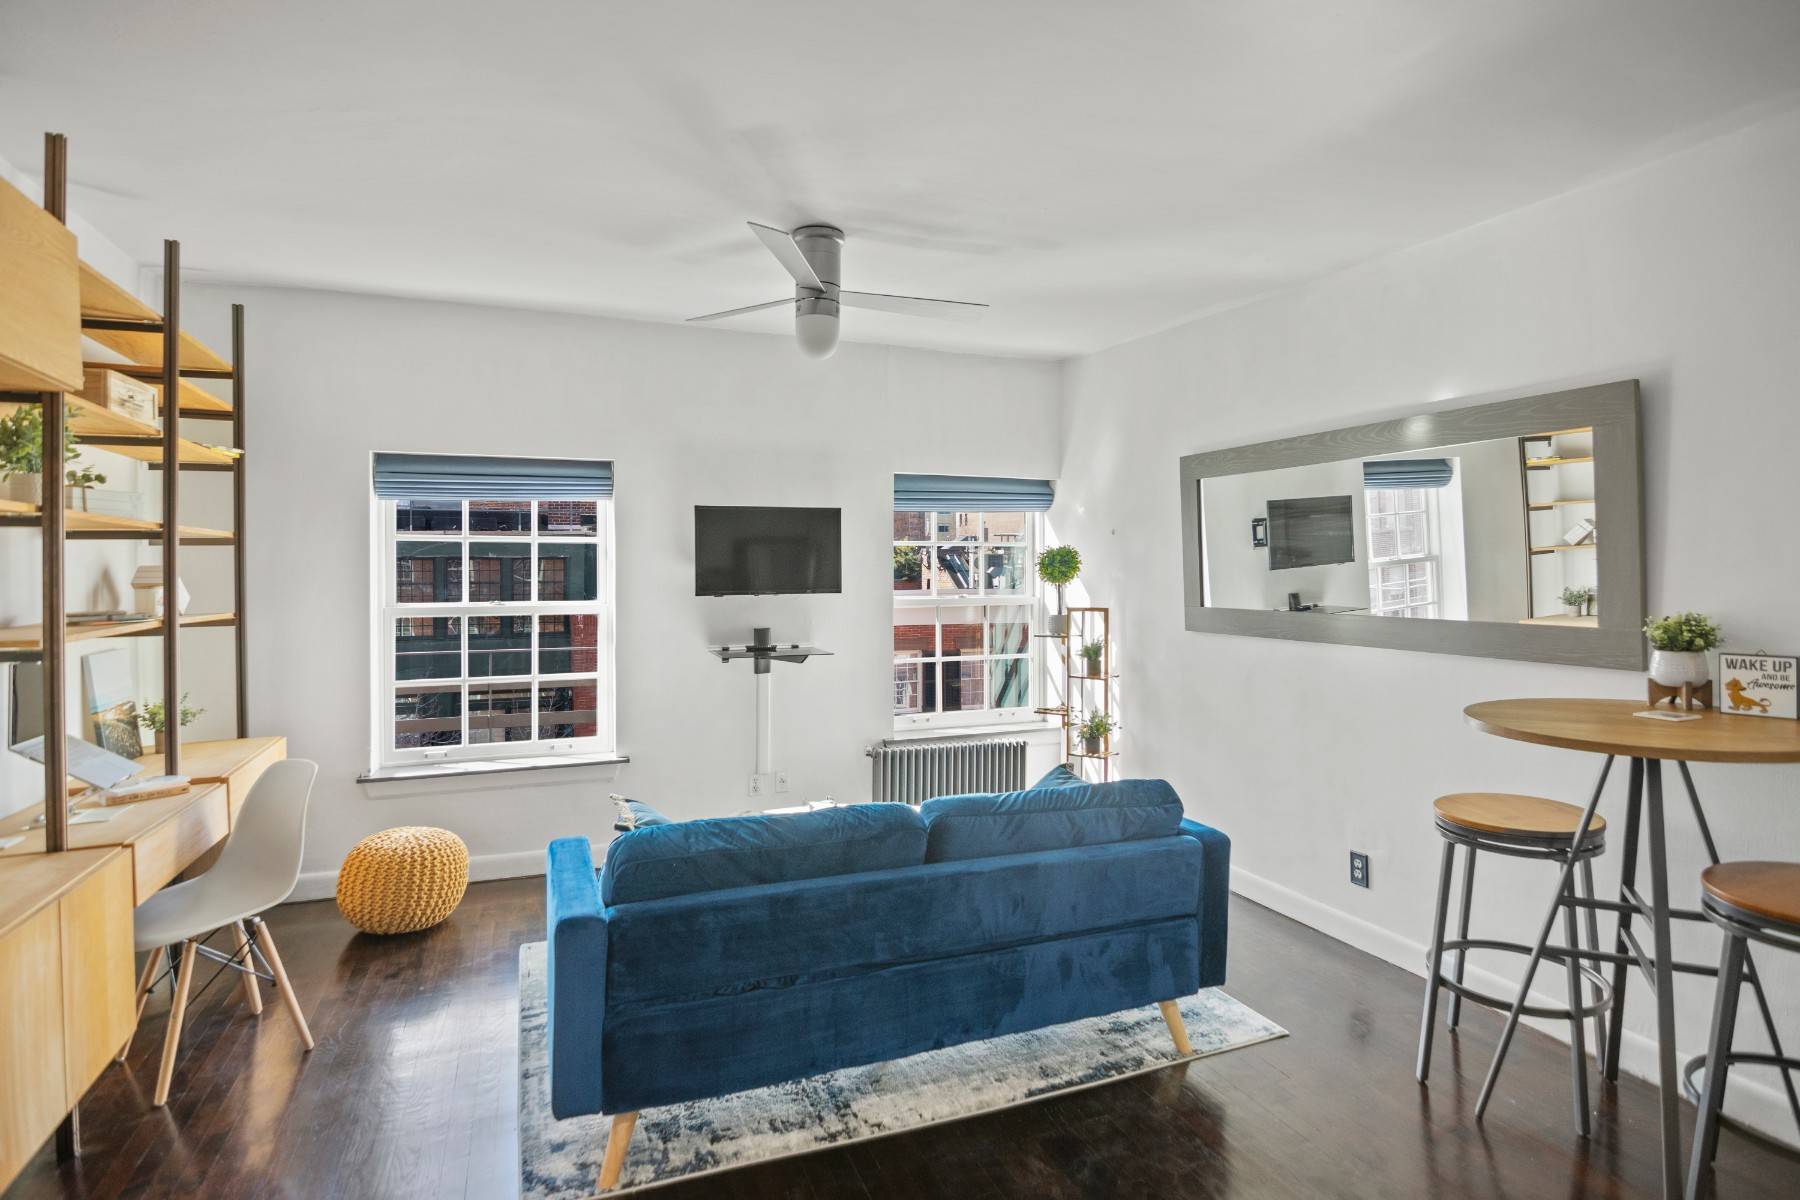 A rare and unique penthouse unit in the heart of the West Village.